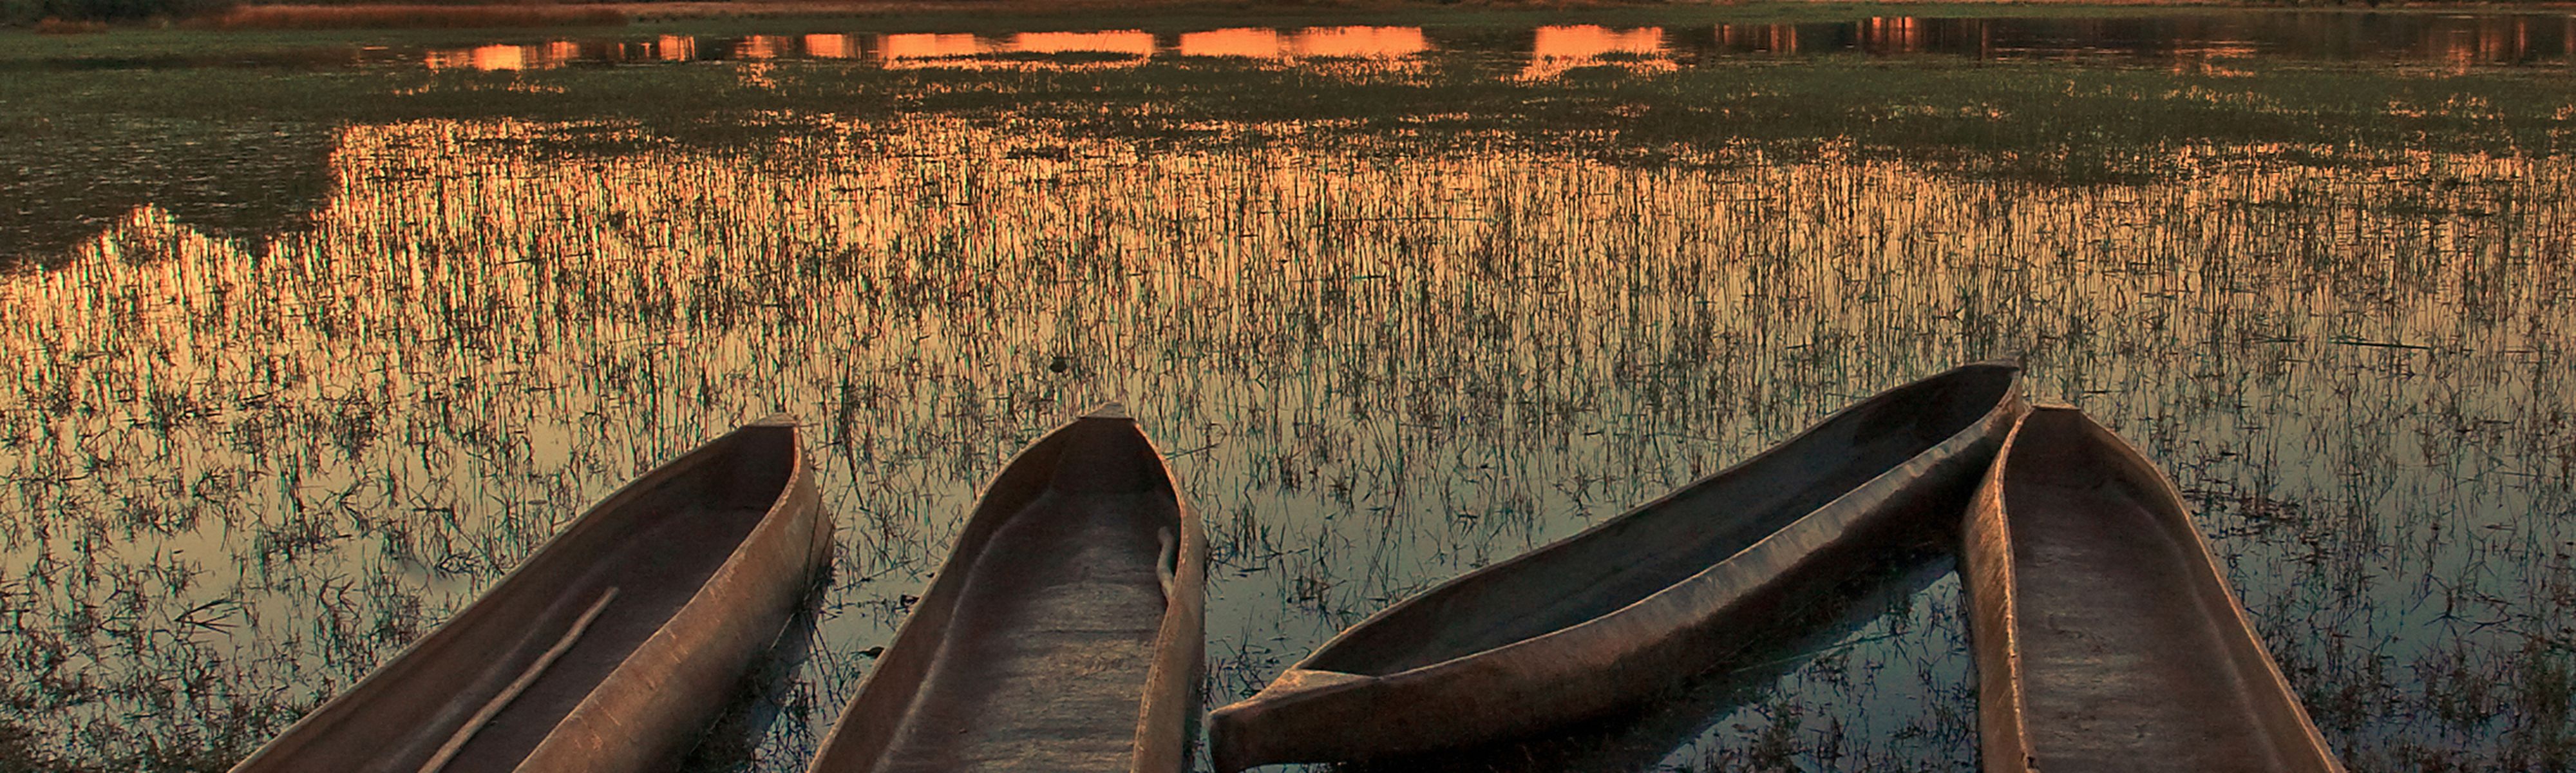 wooden boats on river during sunrise in botswana